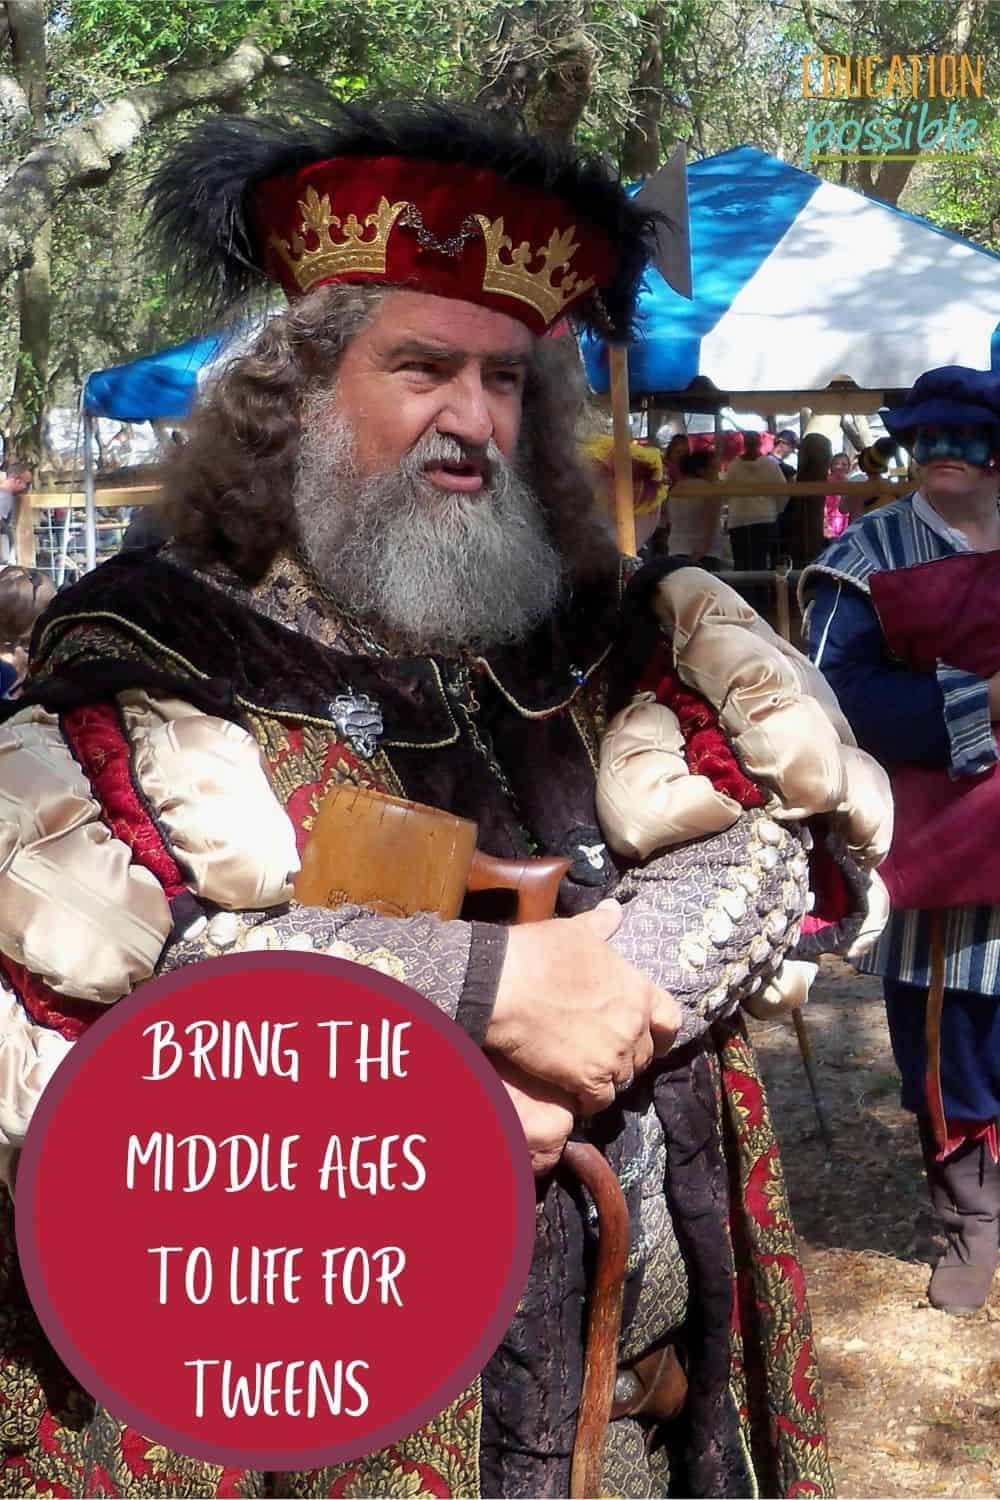 Image of actor at a Renaissance Festival, portraying the King.